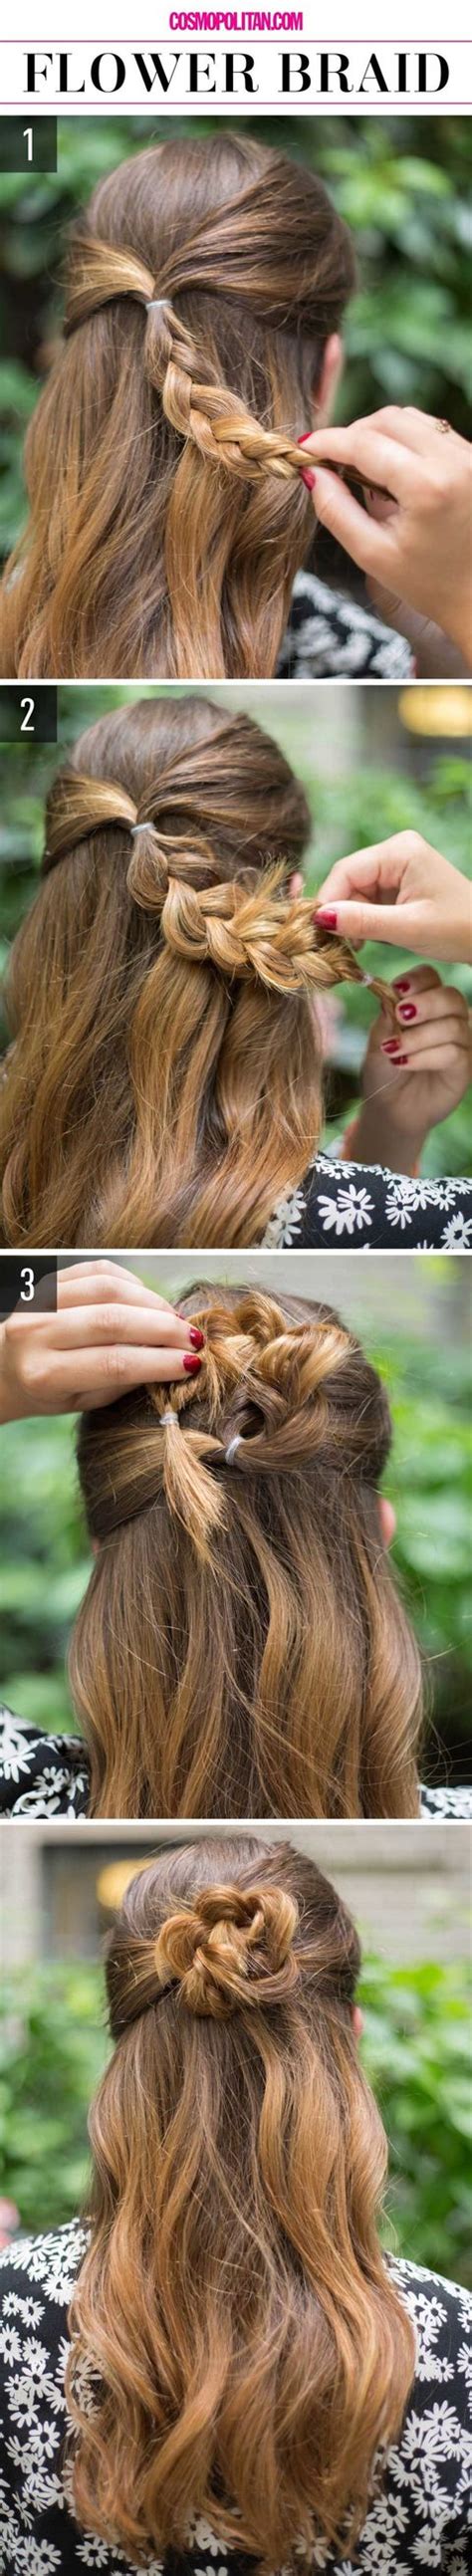 15 Super Easy Hairstyles For 2018 Three Step Hairstyles For Girls